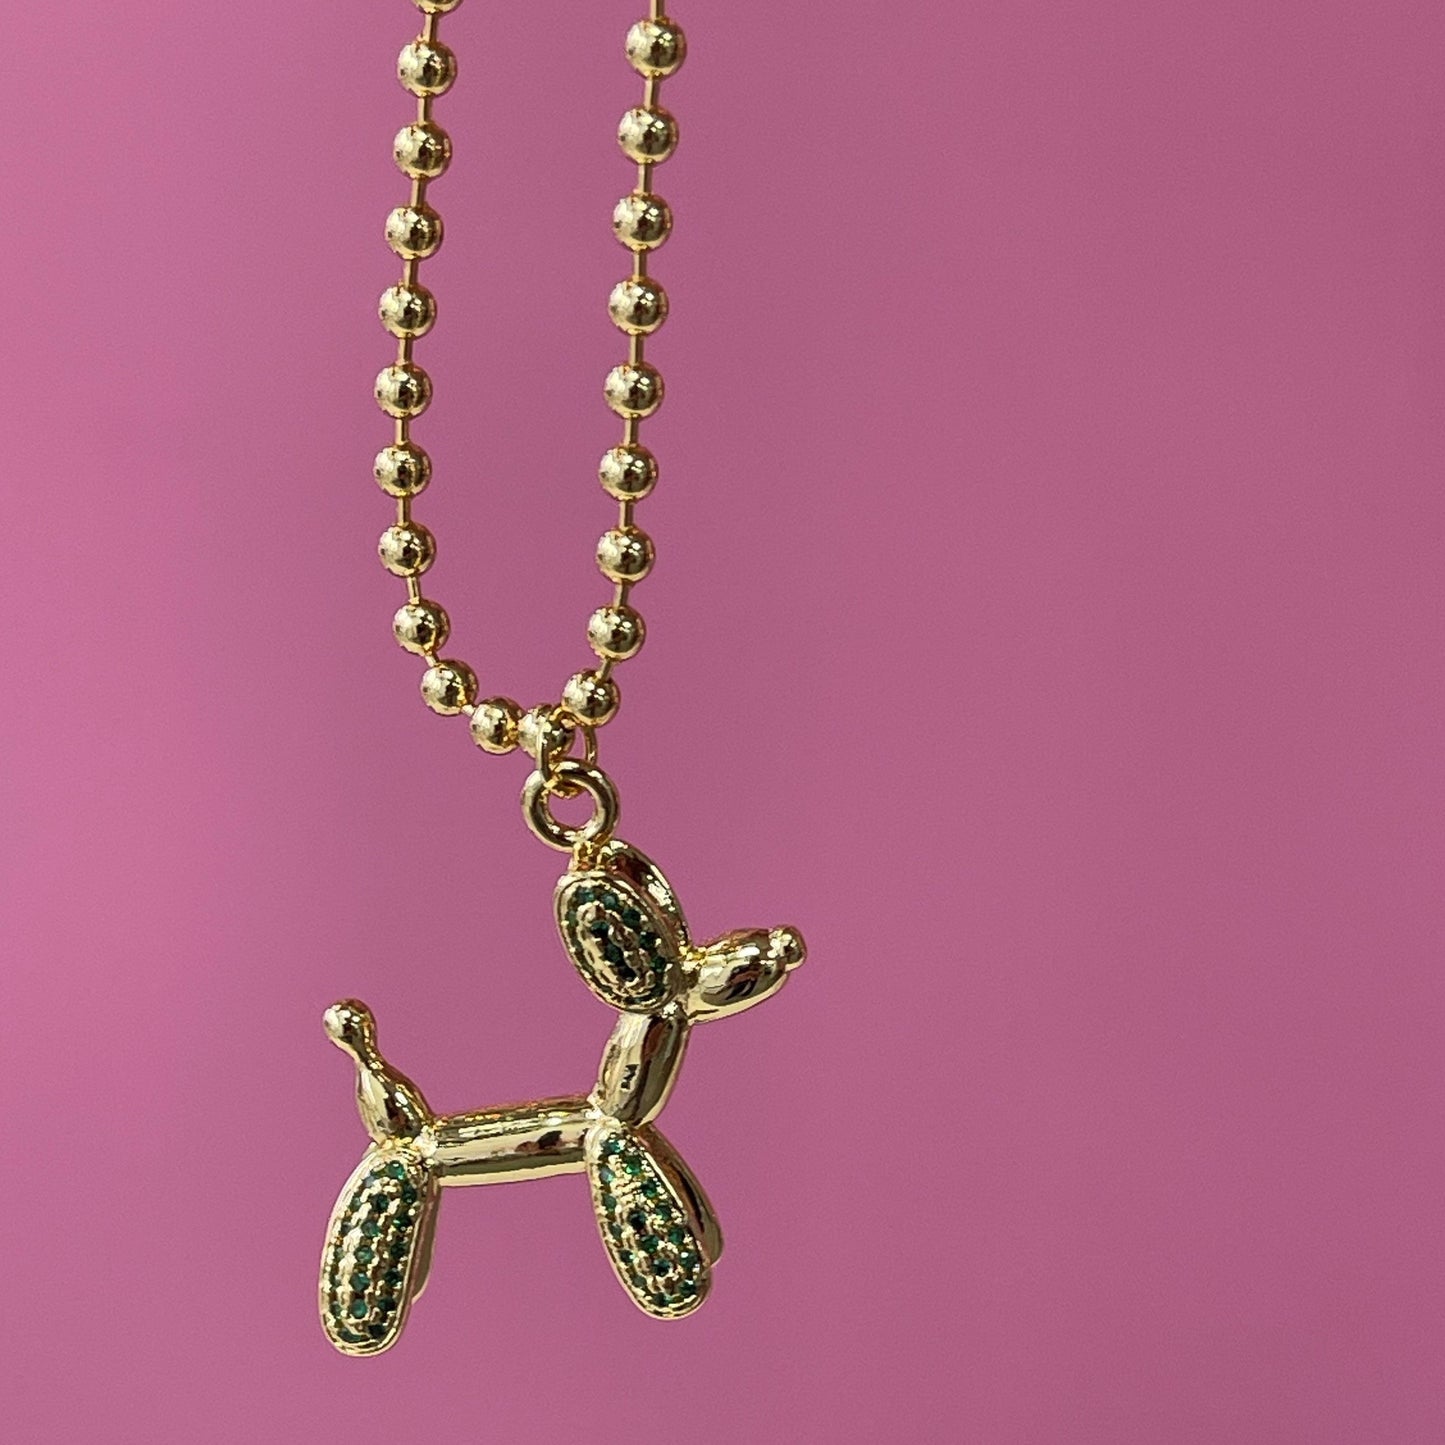 gold tone 16 in adjustable necklace with a balloon shaped dog with red rhinestones